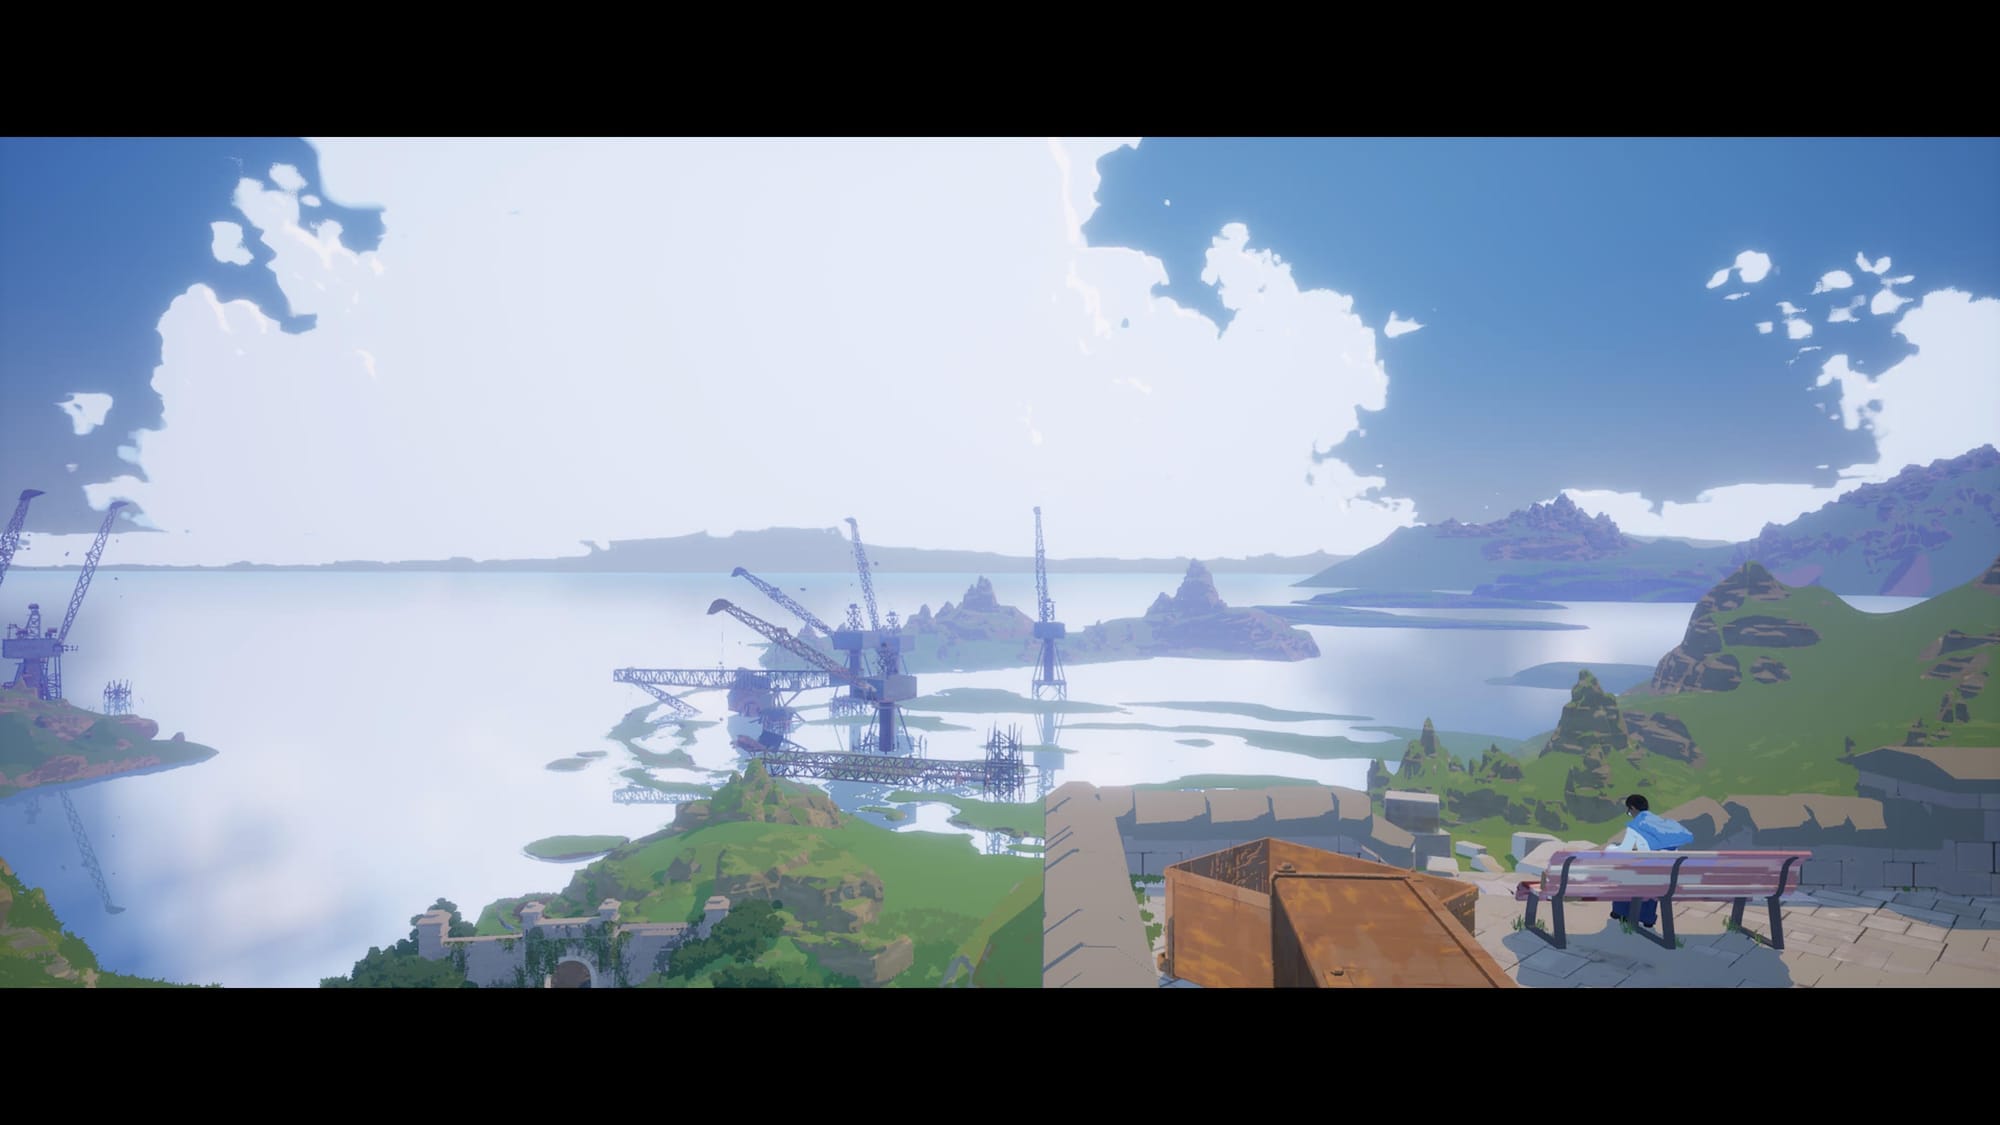 A landscape from the game with cranes, sea and hills in the far and main character sitting on the bench to the right making sketches